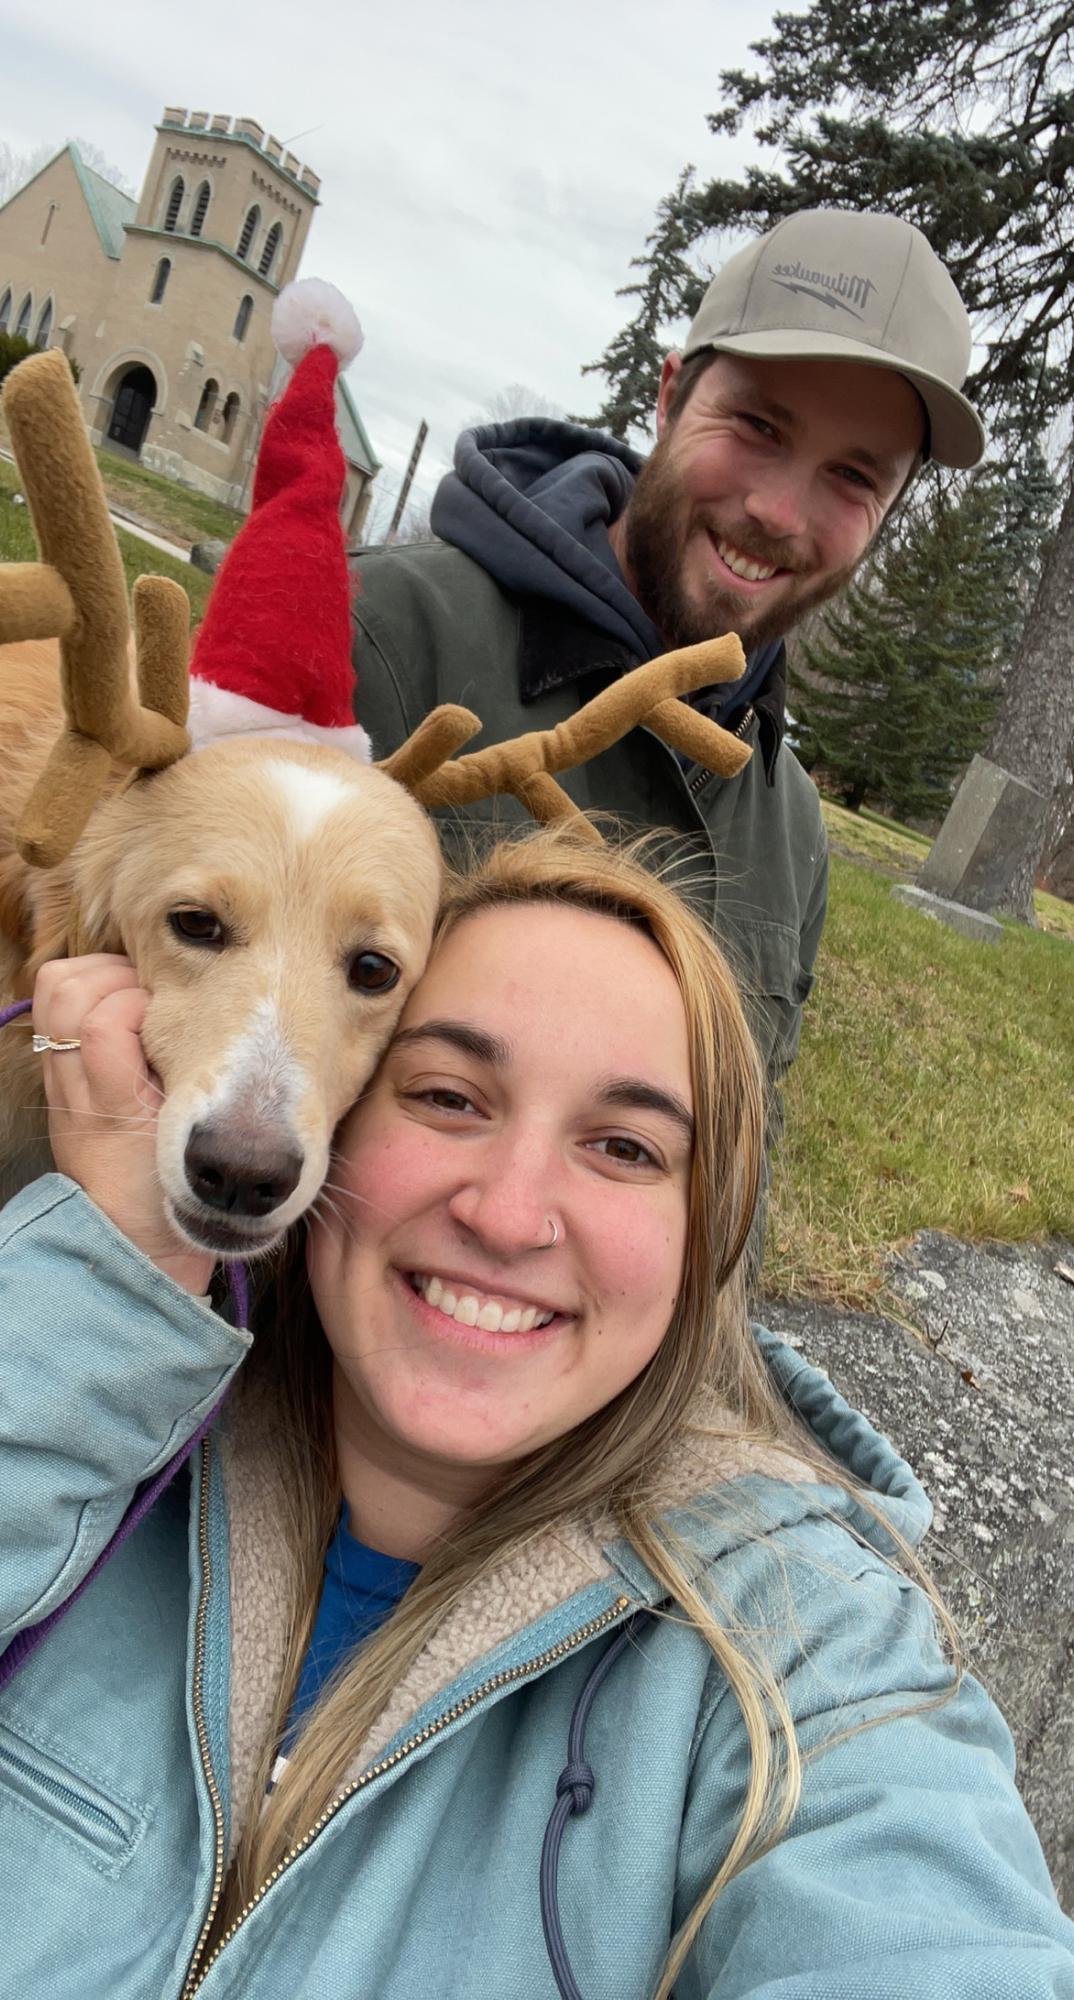 Waiting for the Dover Christmas Parade with our little reindeer